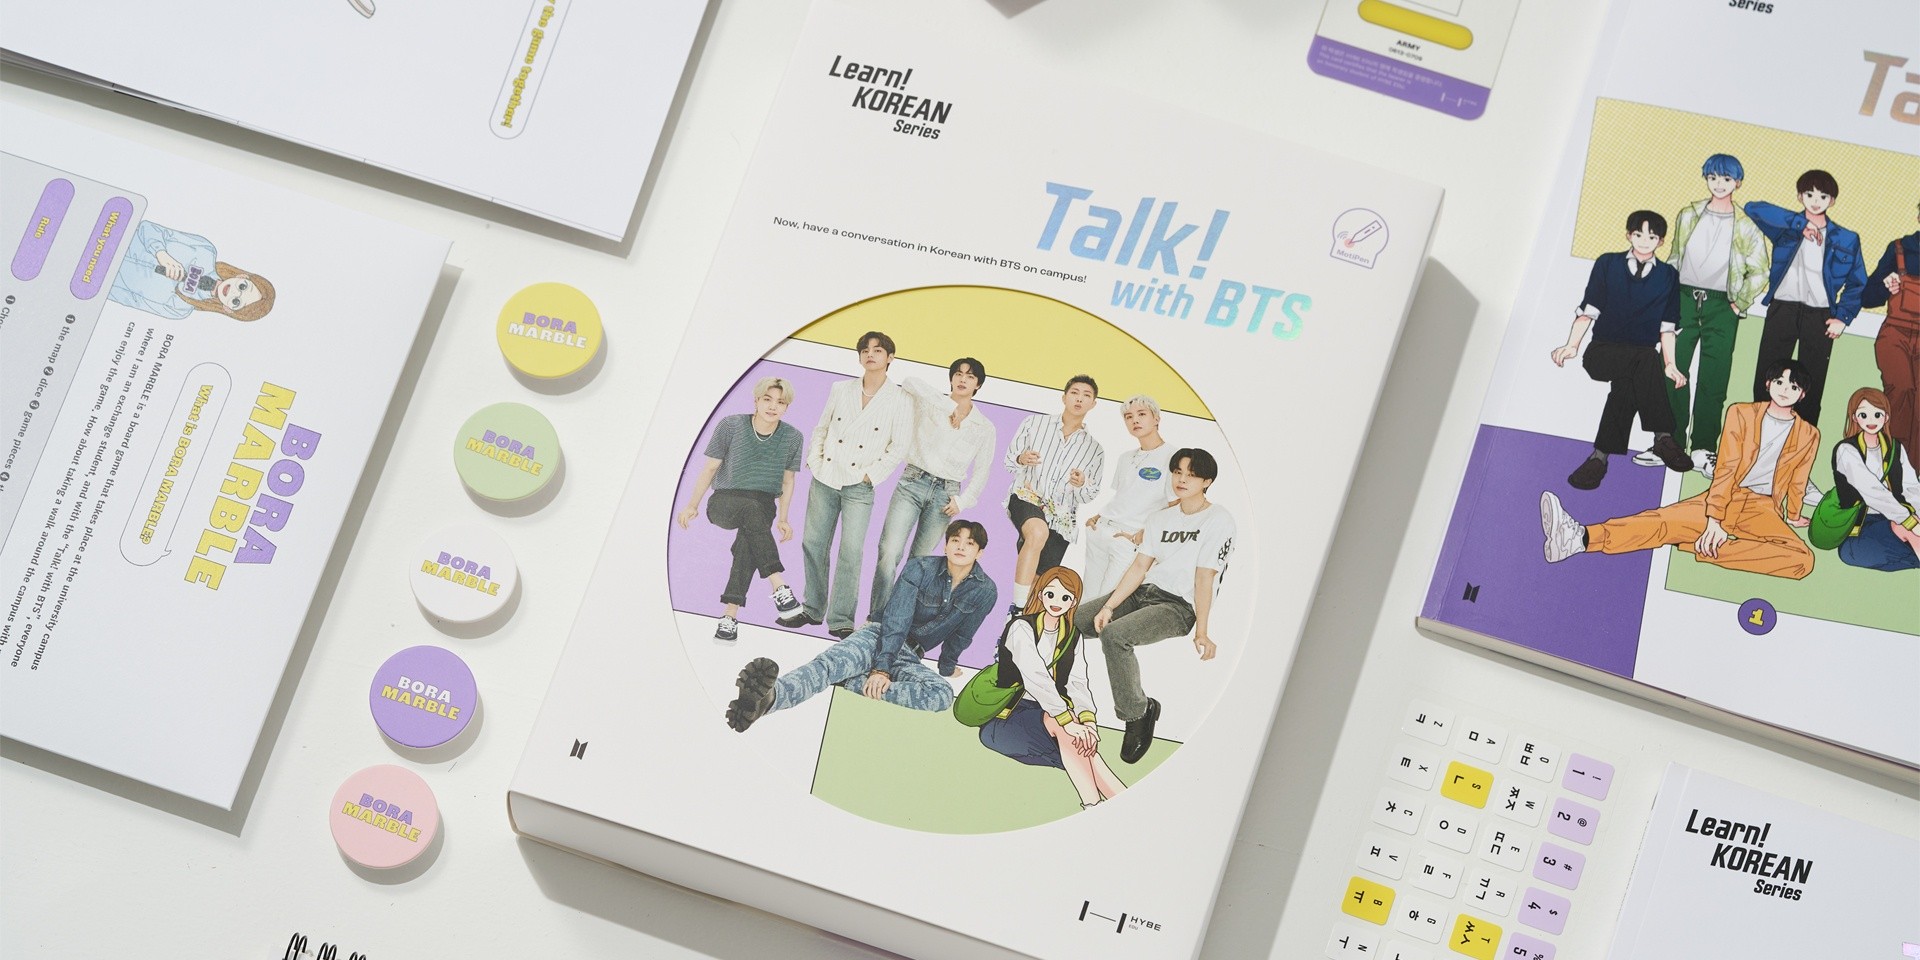 HYBE launches new Korean language study package ‘Talk! with BTS’